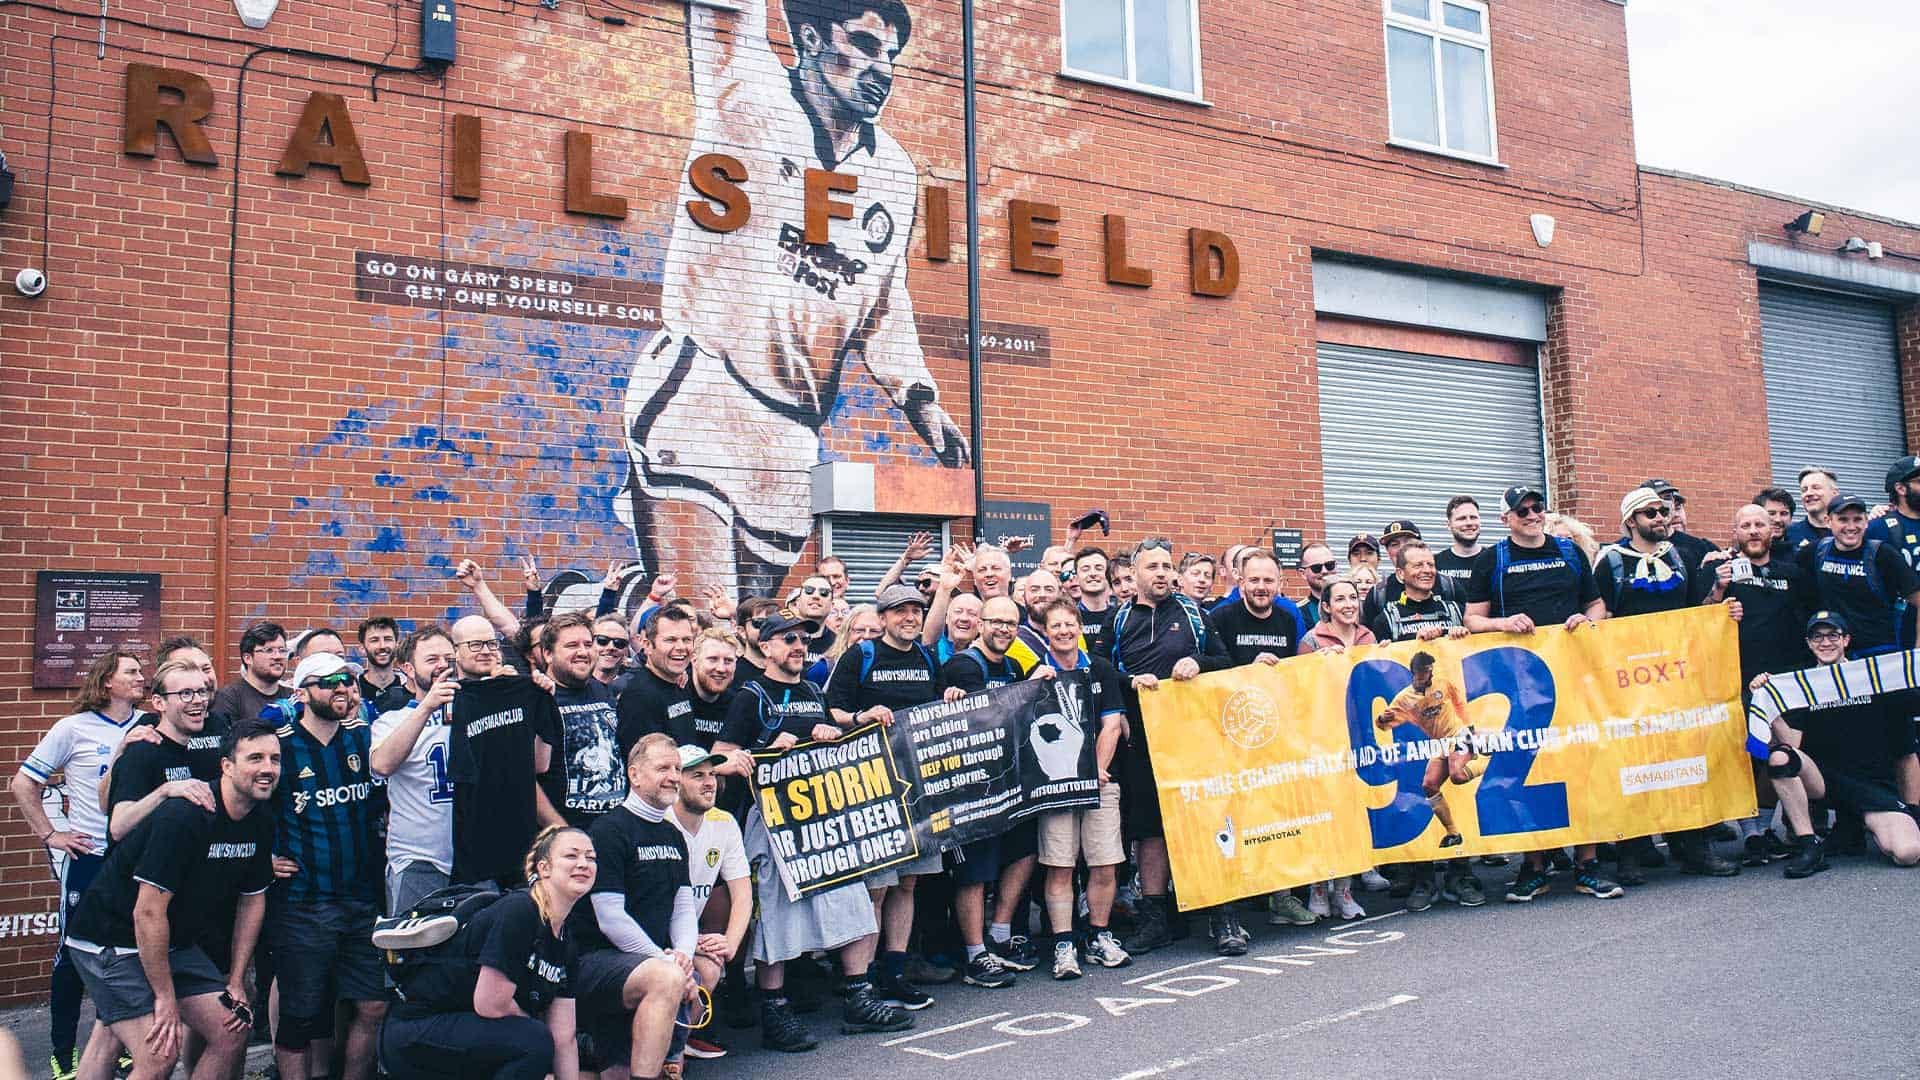 100 tired Leeds fans posing in front of the Gary Speed mural, holding a banner of Gary Speed and another for Andy's Man Club, around 90 miles into their 92 mile walk